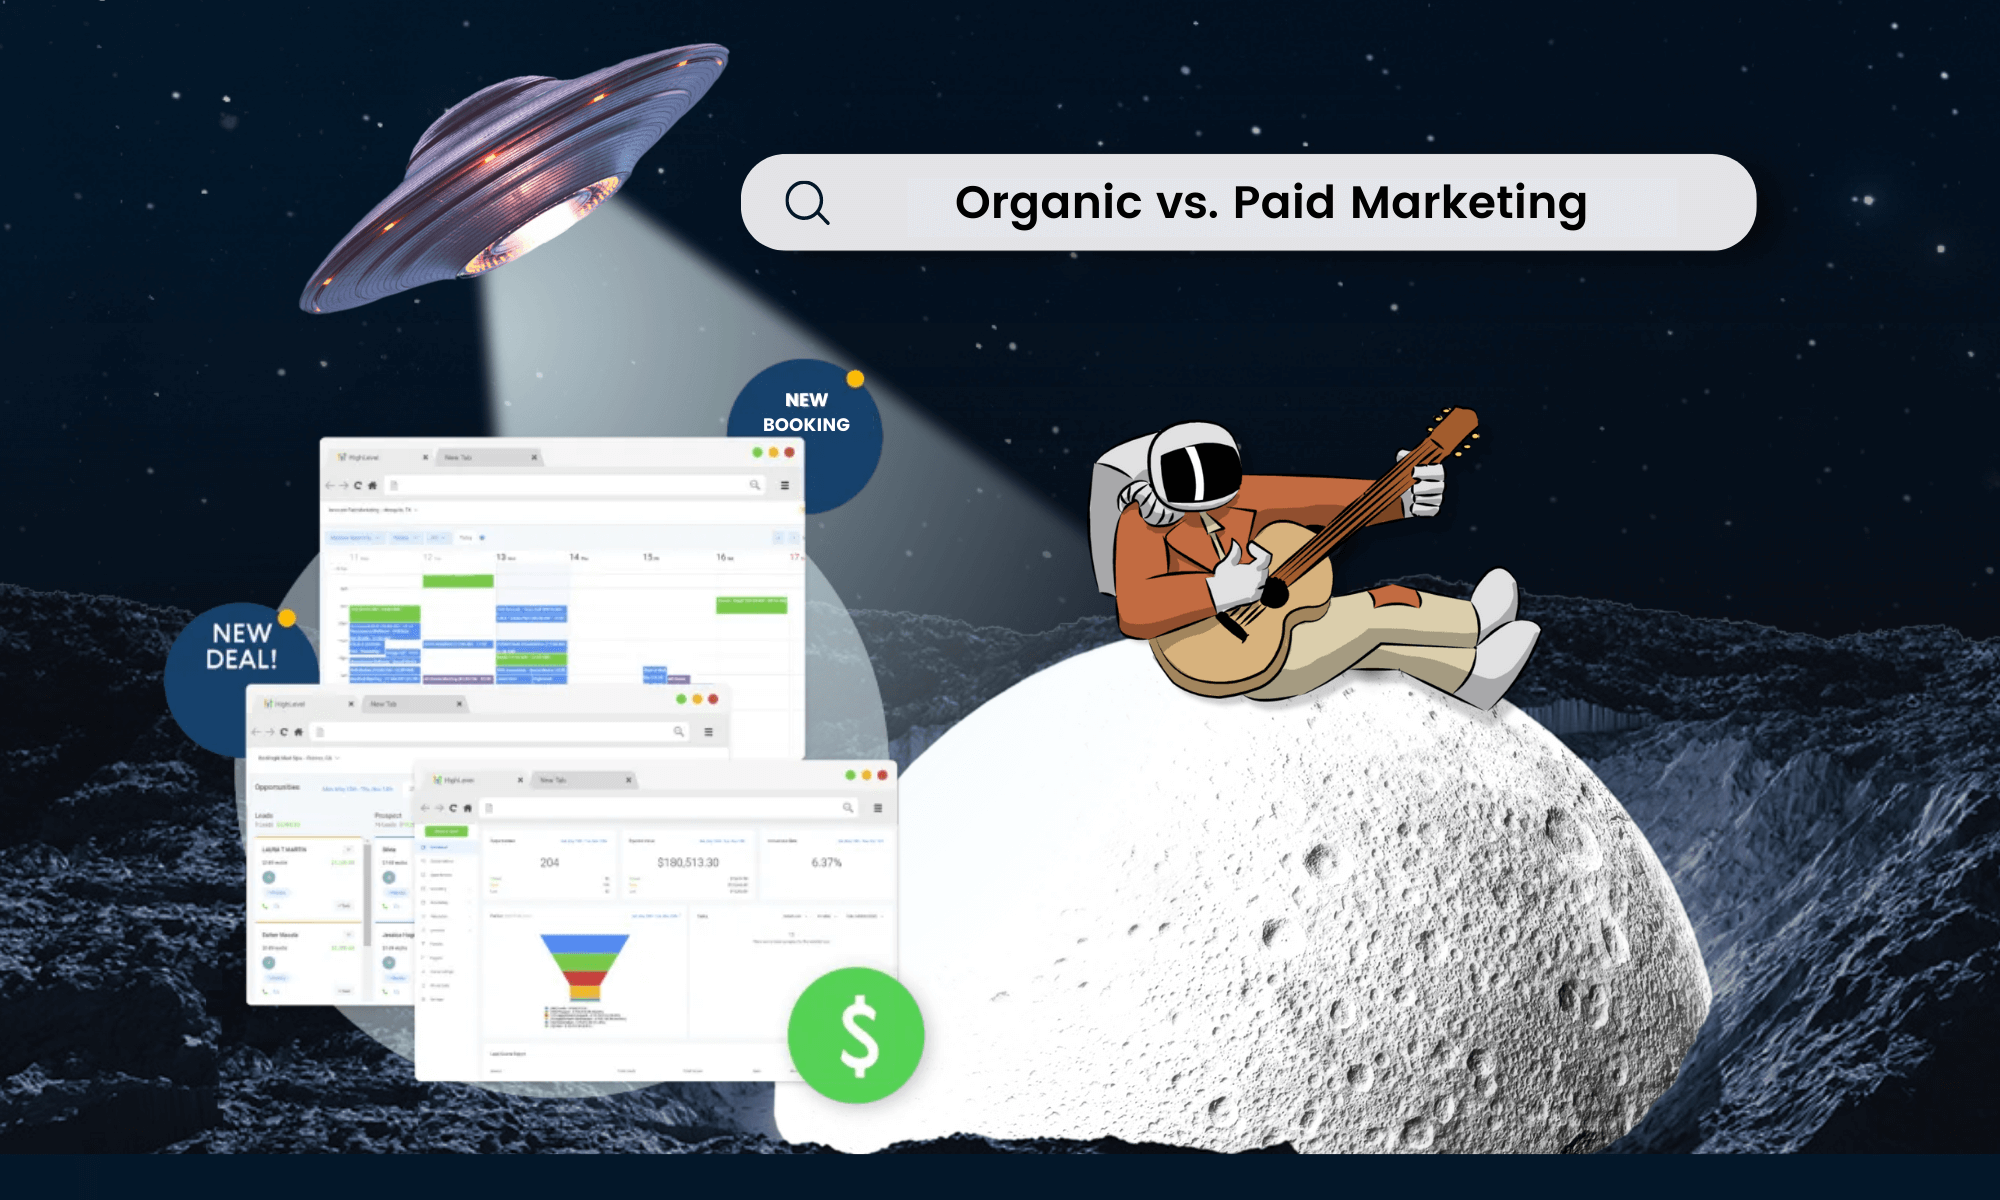 Organic vs. Paid Marketing. Image of the exploringnotboring astronaut sitting on top of the the moon cratered in a planet's dark, bare crust whilst playing the guitar. To the left is a blurred screen shot of reports and marketing funnels.